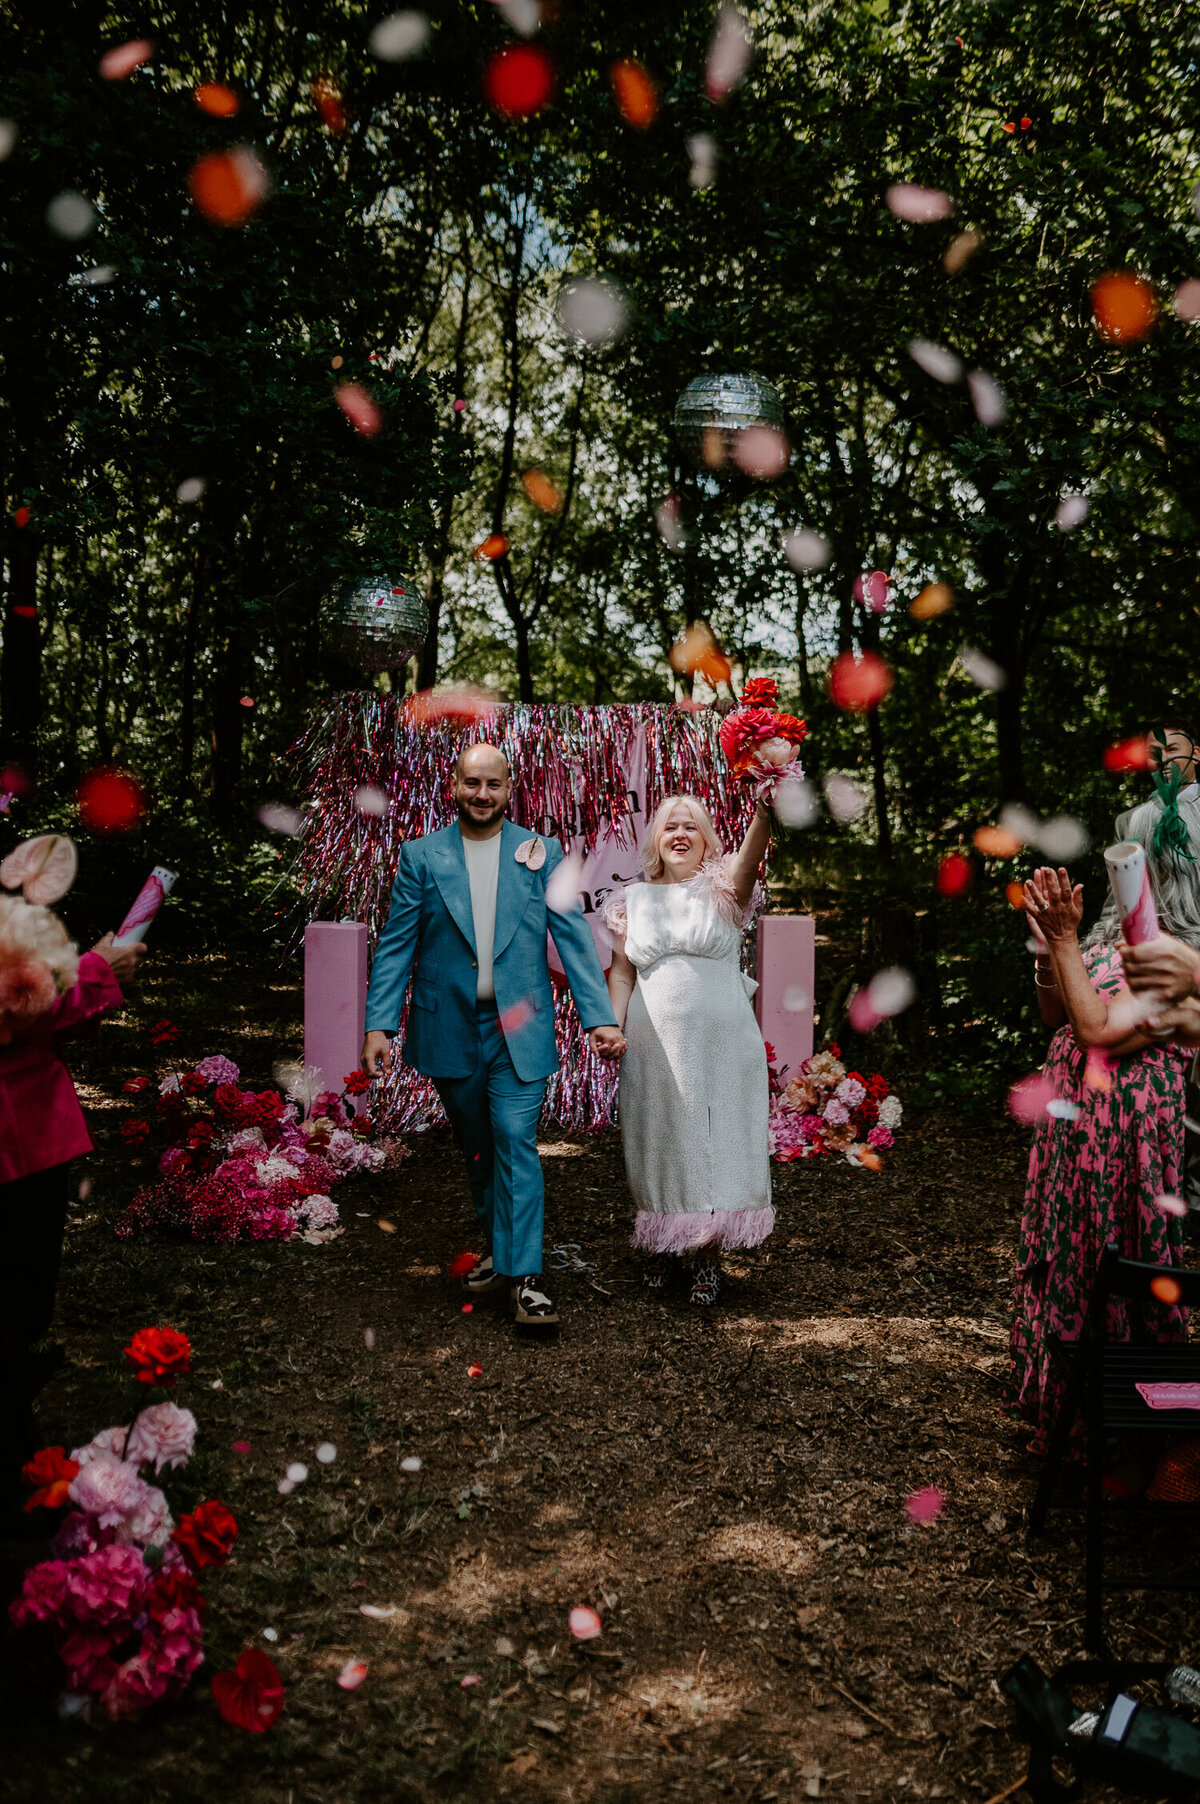 A Bride and Groom exiting their pink woodland wedding to their guests showering them with pink confetti. The bride has a short sleeve dress with pink fringing and holding a pink bouquet of flowers whilst the groom is wearing a blue suit with cow print Clarks Originals.